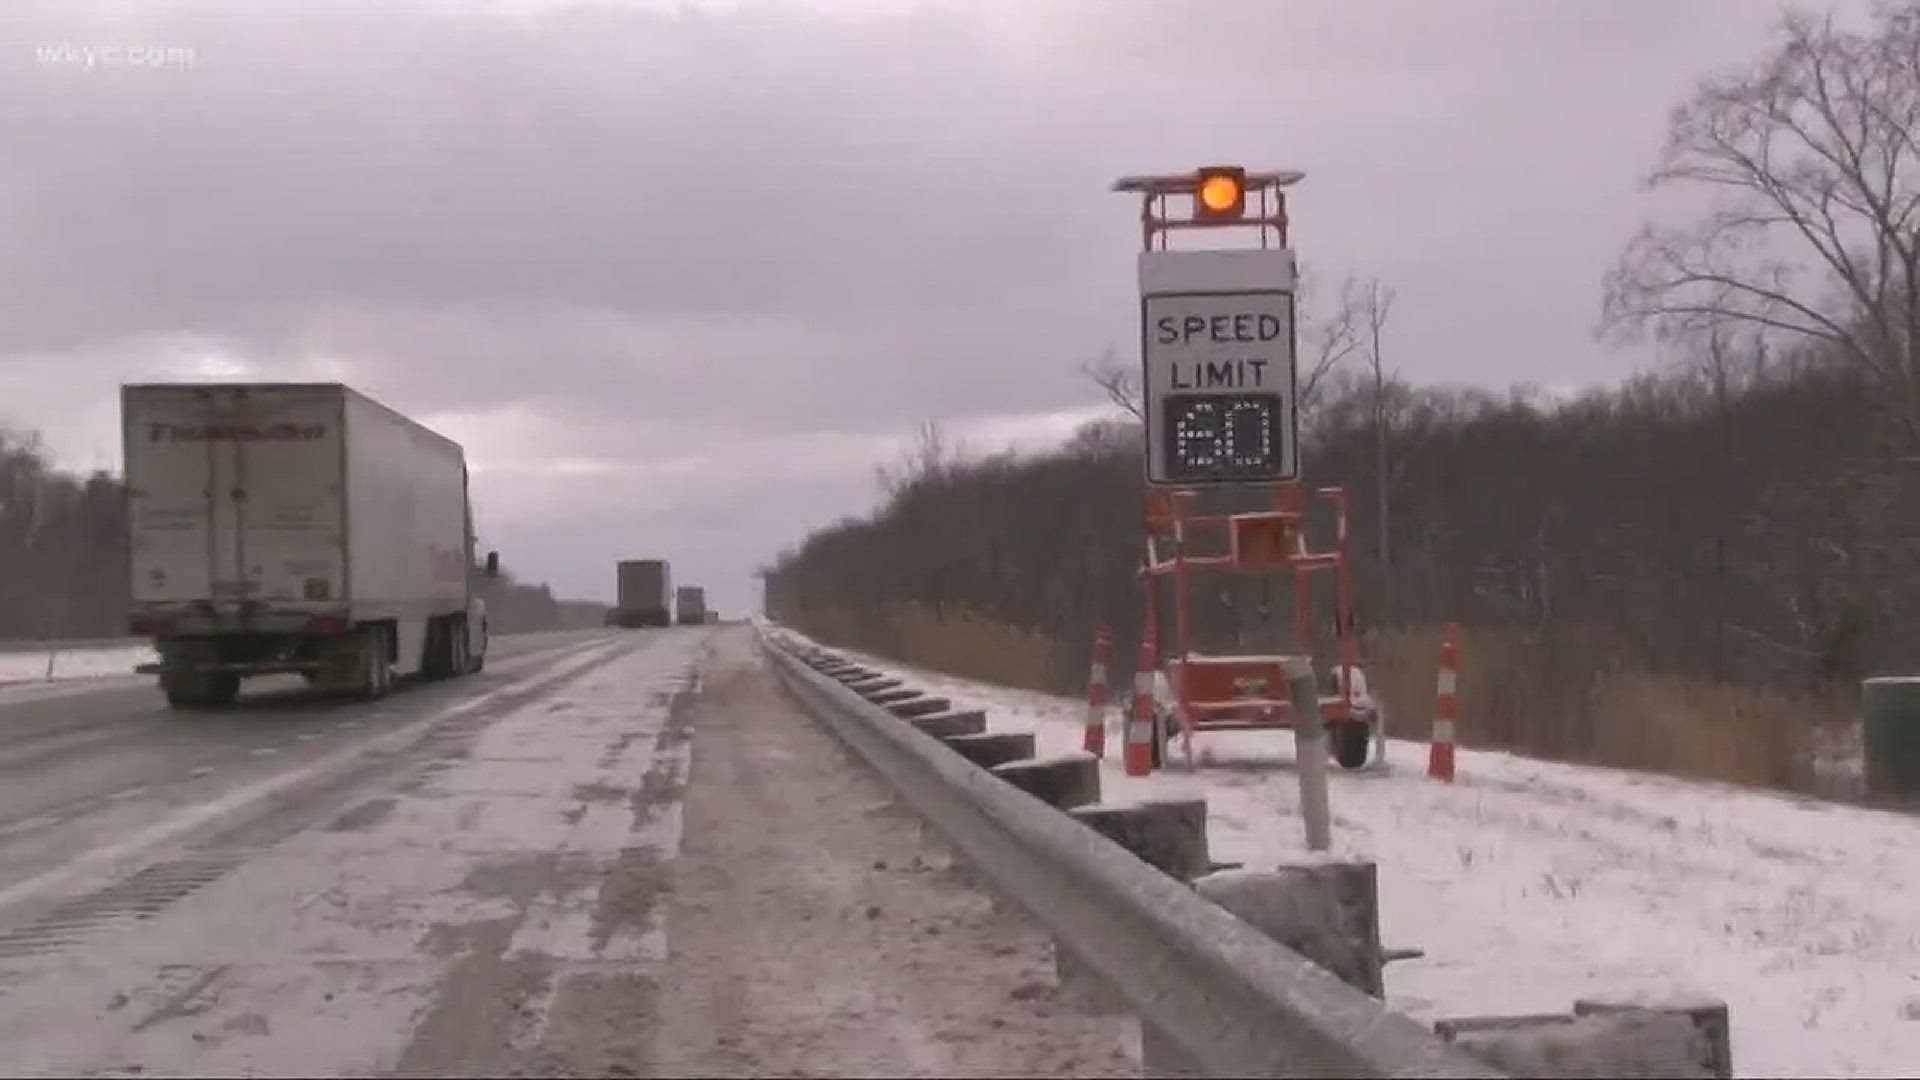 ODOT continues to regulate speed limits on I-90 near Vrooman Road